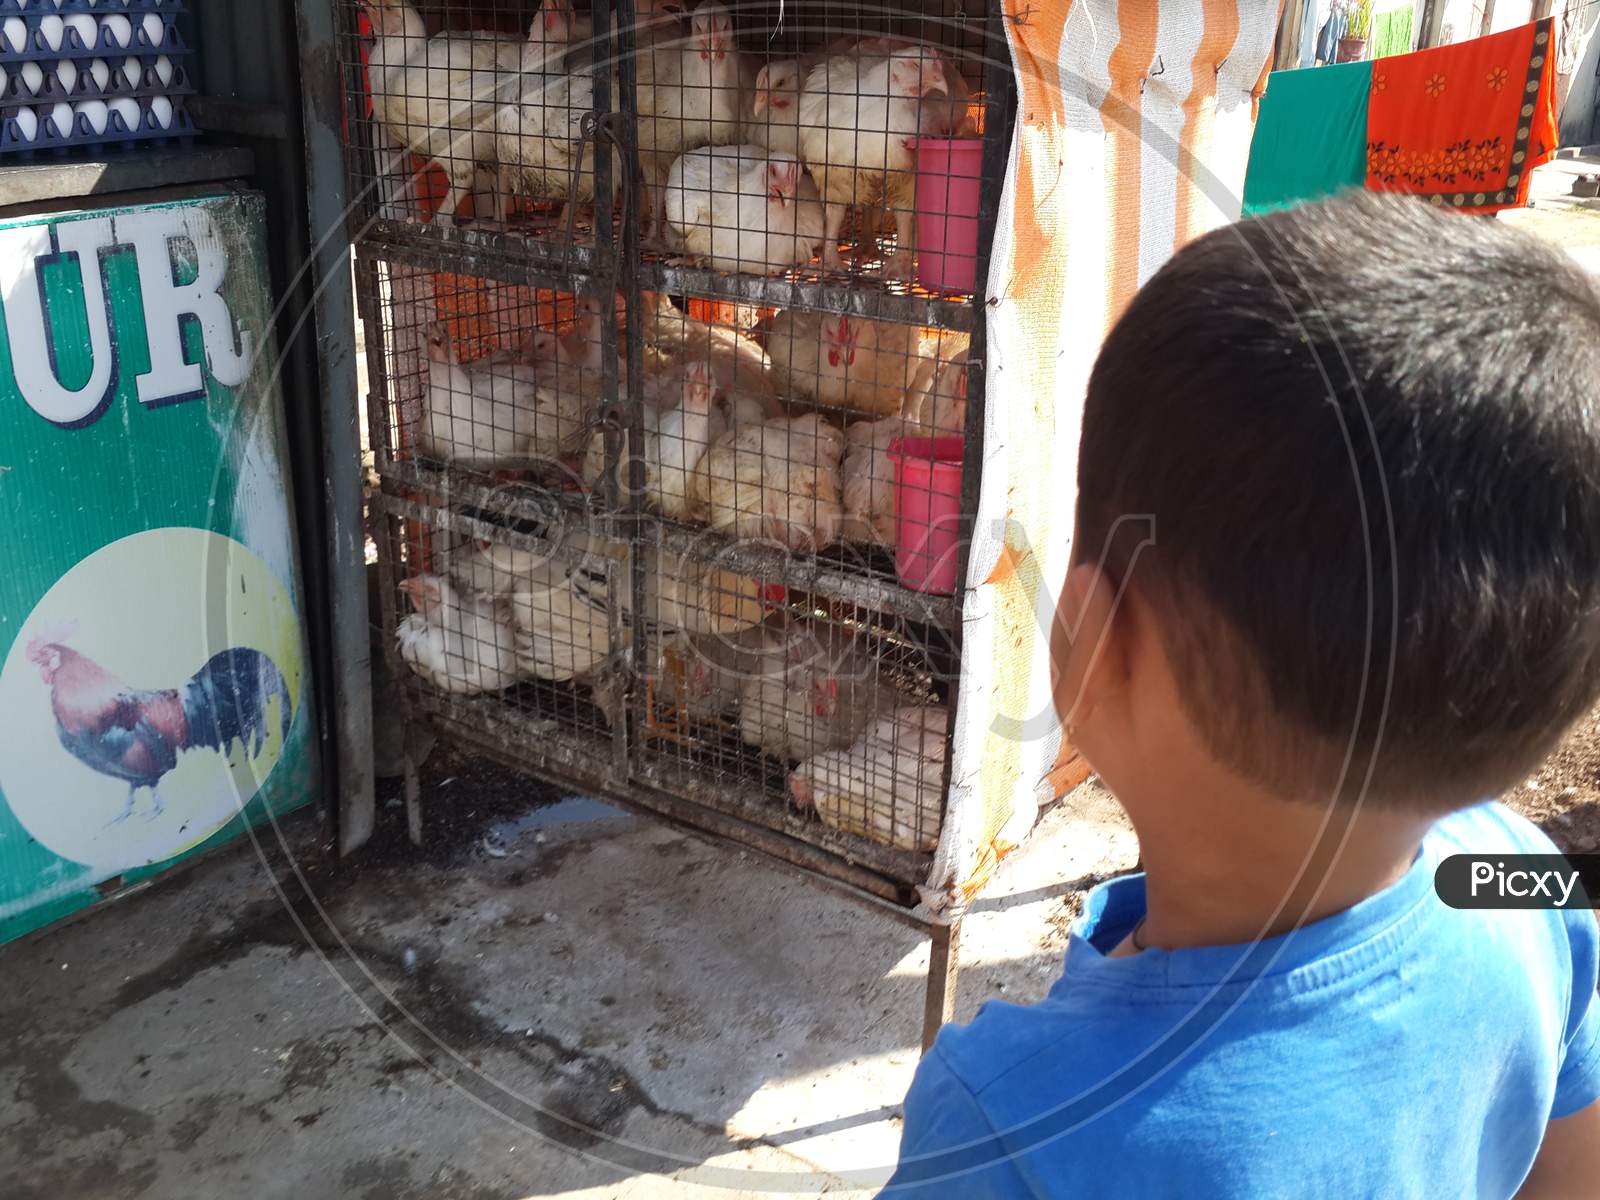 Boy looking at caged broiler chicken